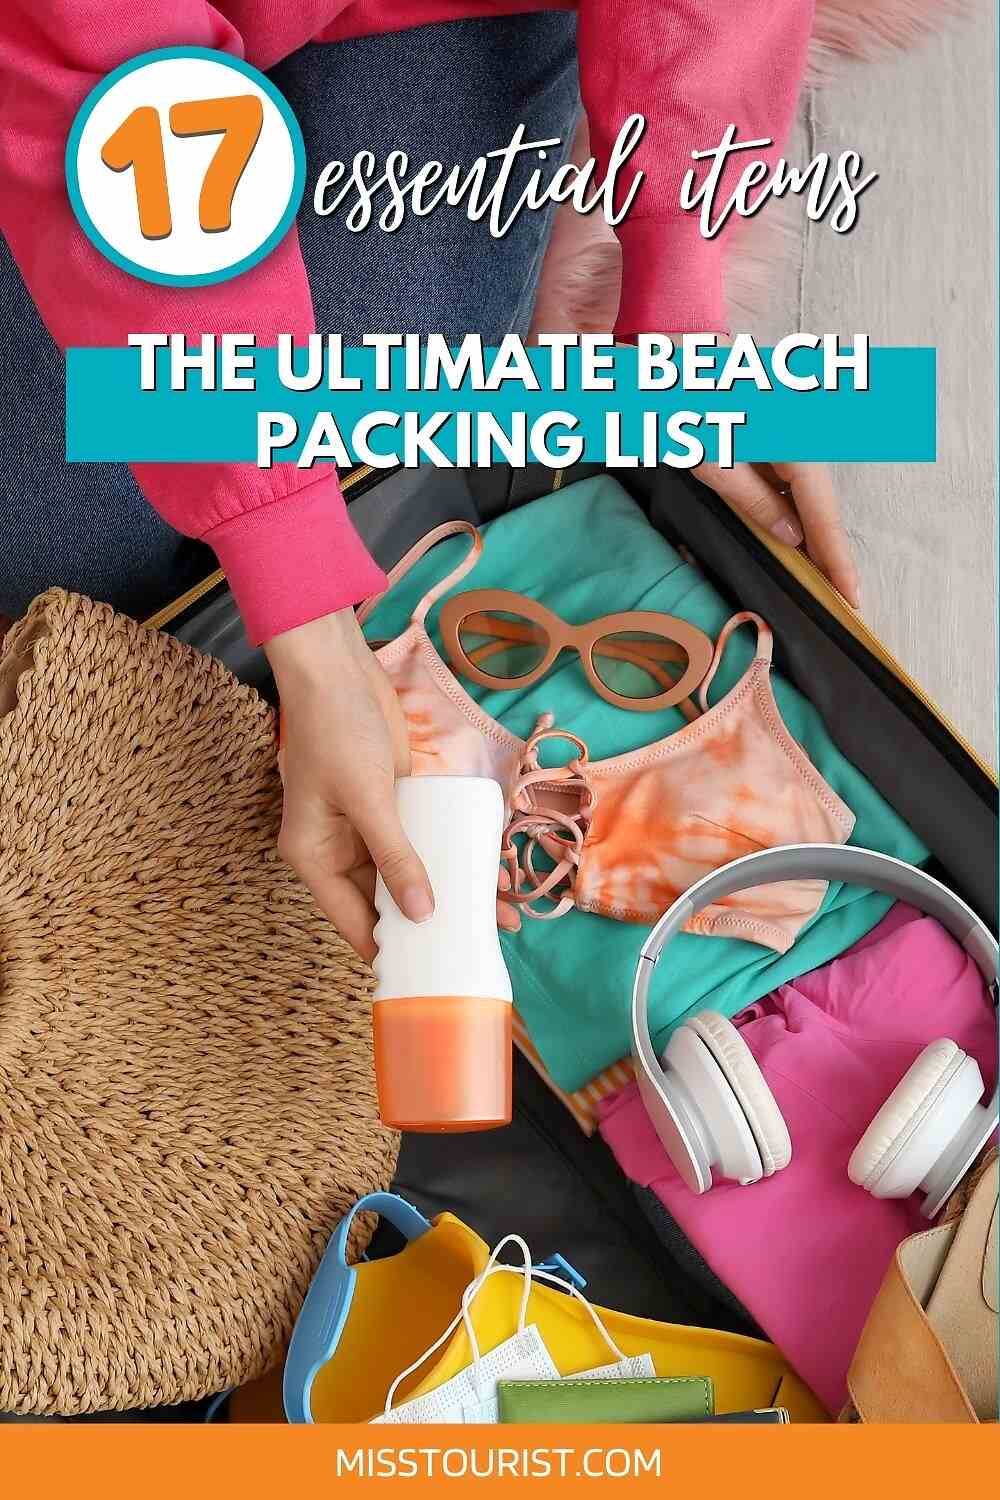 Overhead view of a suitcase with beach essentials including a swimsuit, sunhat, sunglasses, headphones, and a portable speaker. Text overlay reads: "17 Essential Items - The Ultimate Beach Packing List.